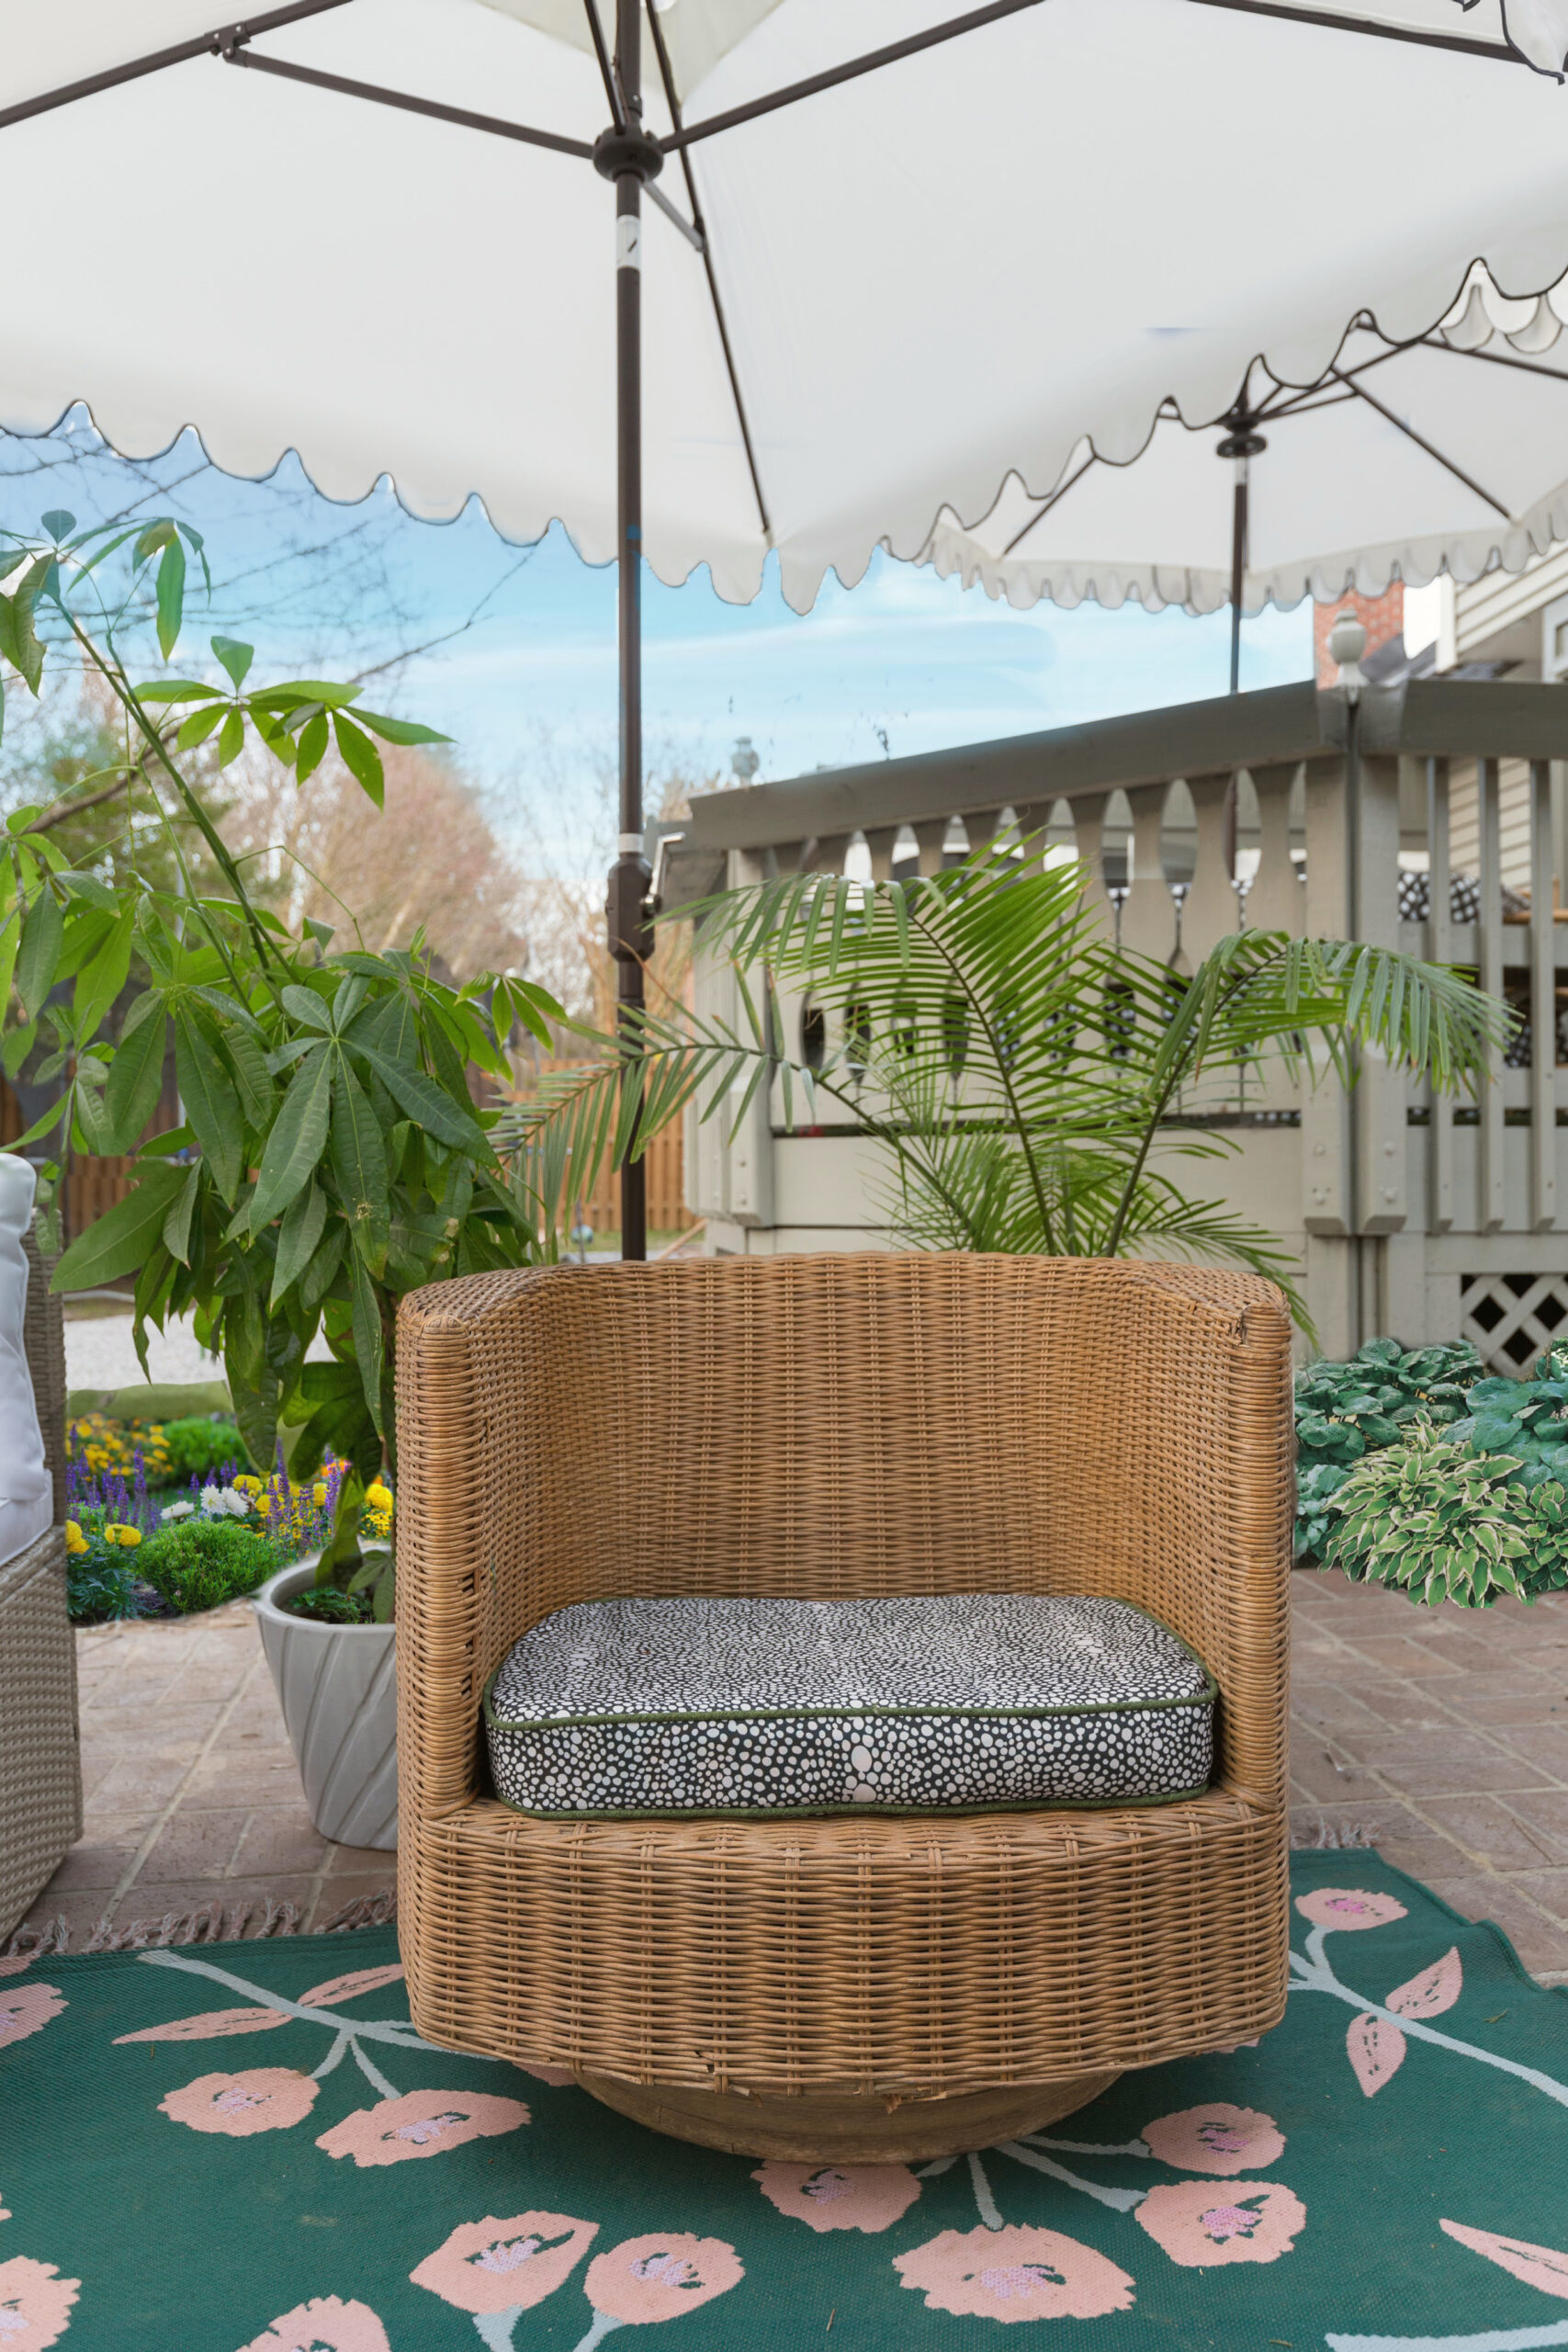 how to upholster outdoor patio furniture, patio cushions, DIY, Outdoor cushions, spoon flower, wicker chair, recycled canvas